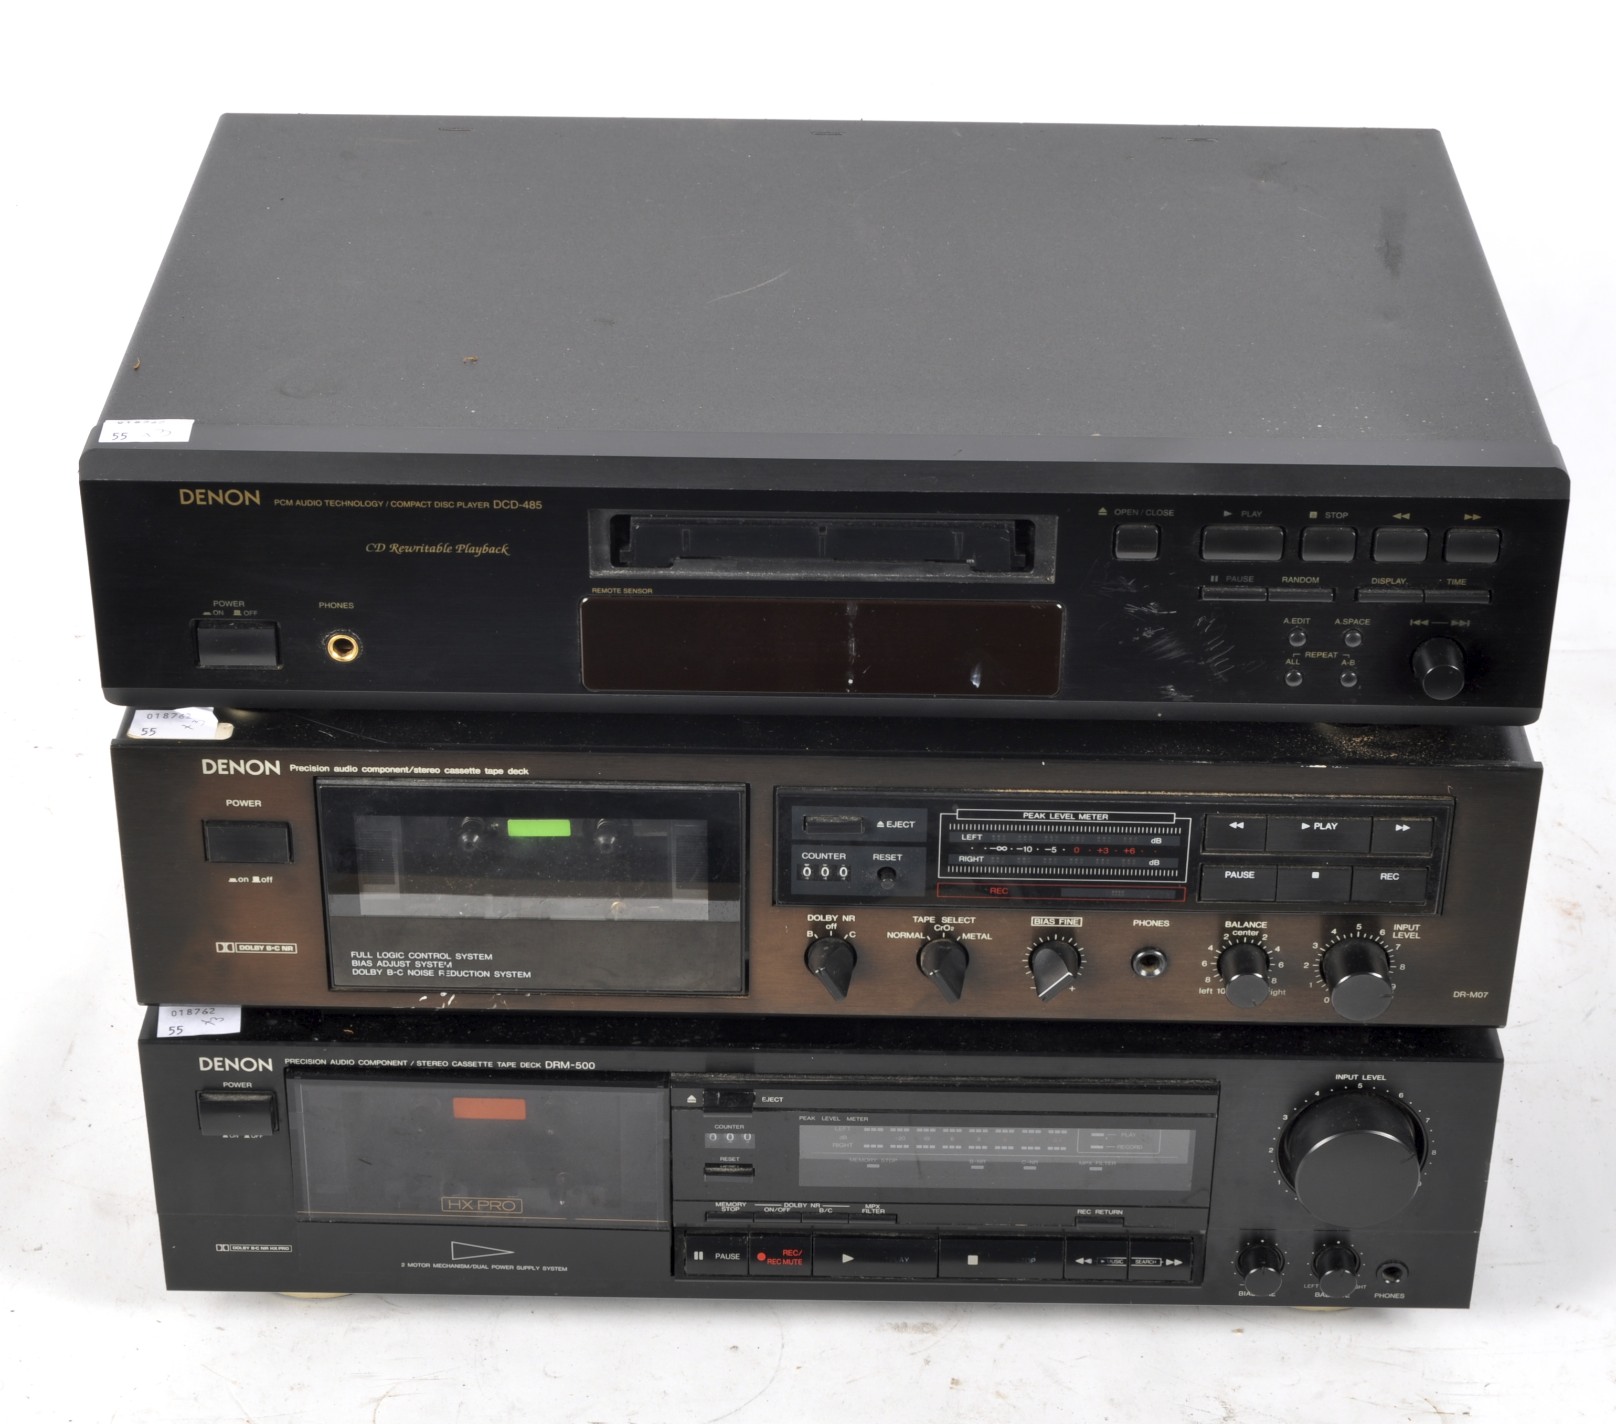 Two Denon cassette tape decks together with a Denon compact disc player,